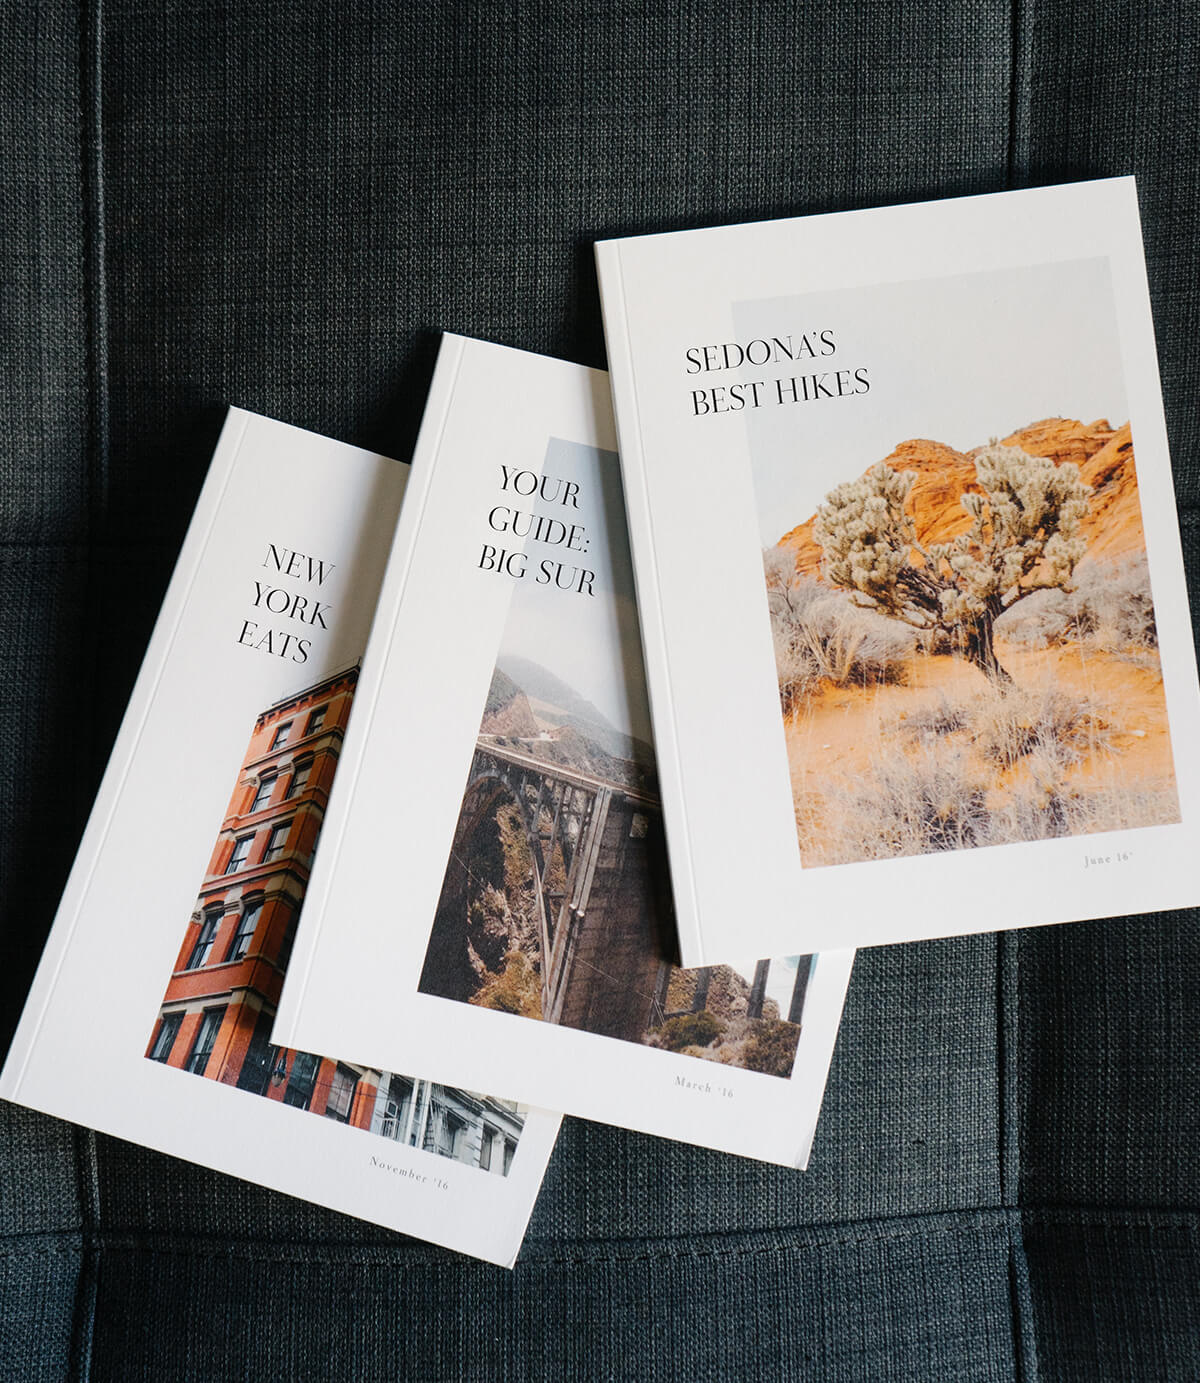 Artifact Uprising Softcover Photo Book being used as city guide books for an Airbnb